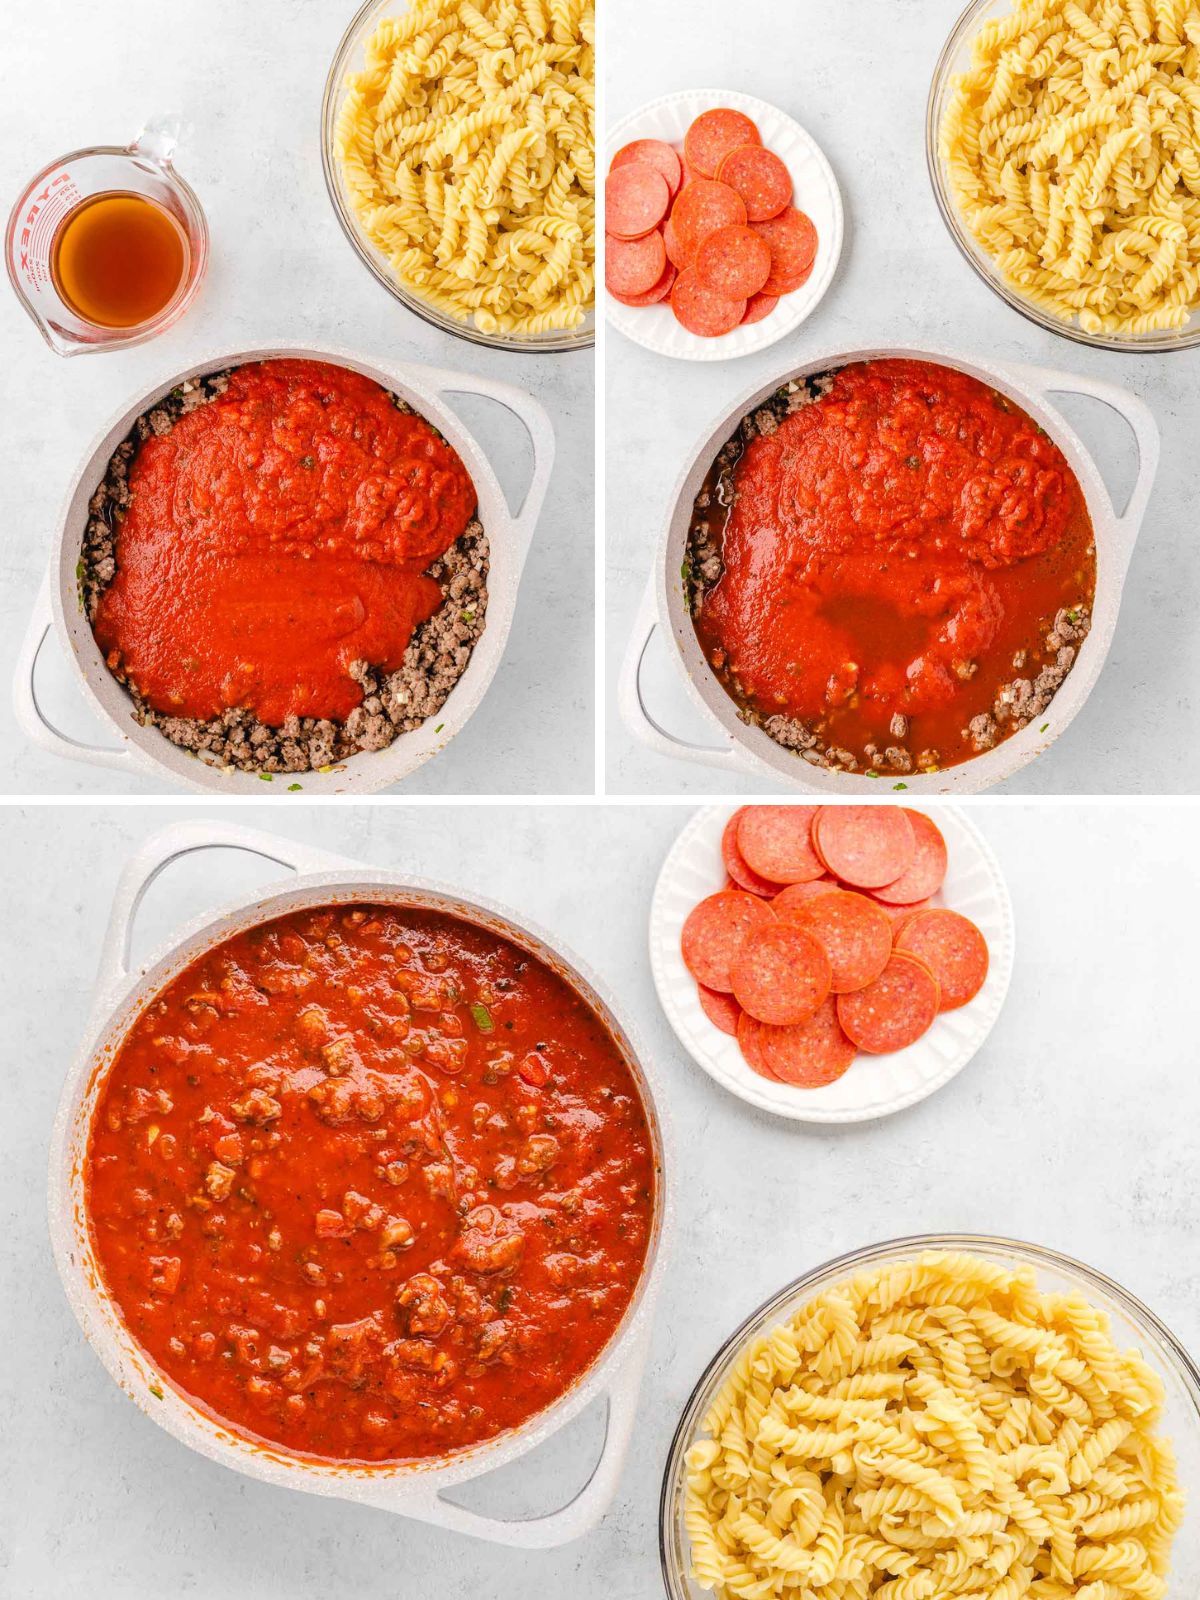 Collage image showing adding marinara, pizza, and beef broth to ground beef mixture in pan.